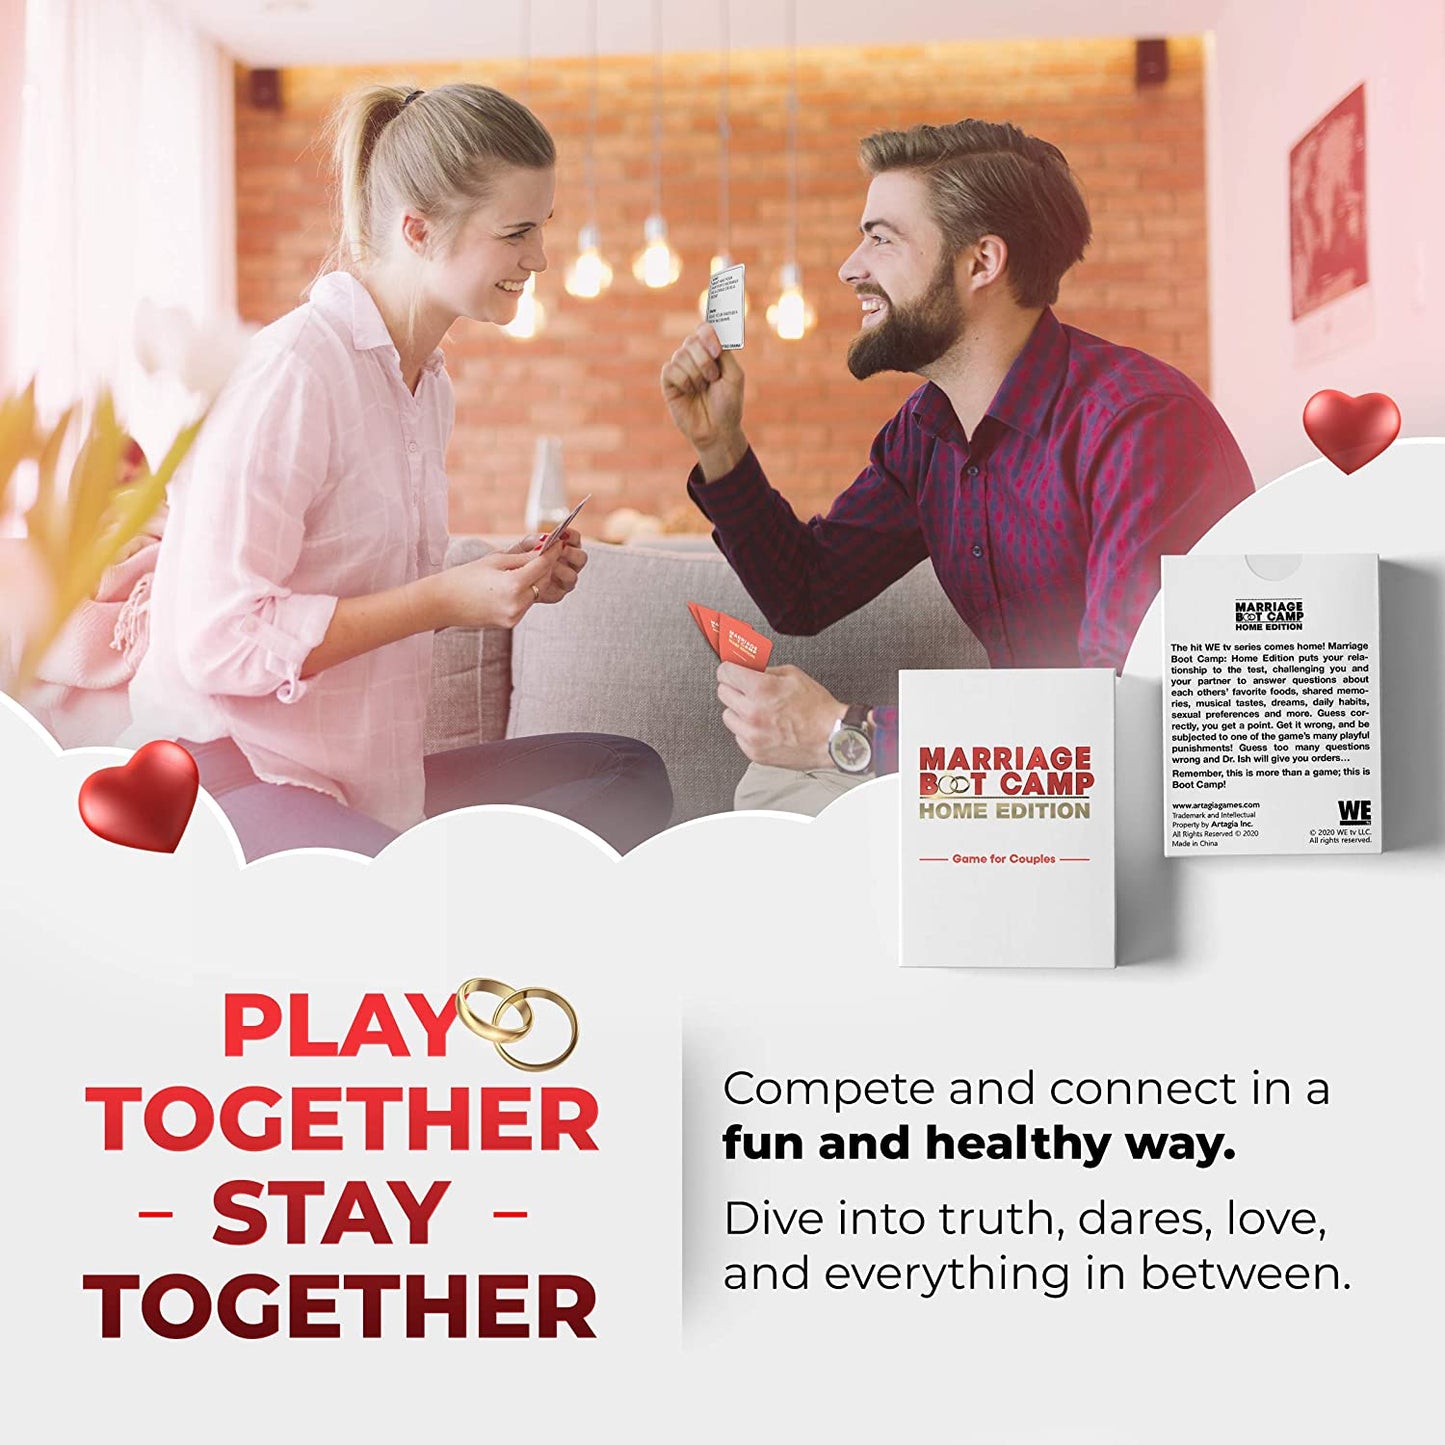 Marriage Boot Camp Home Edition Card Game – AMC Shop